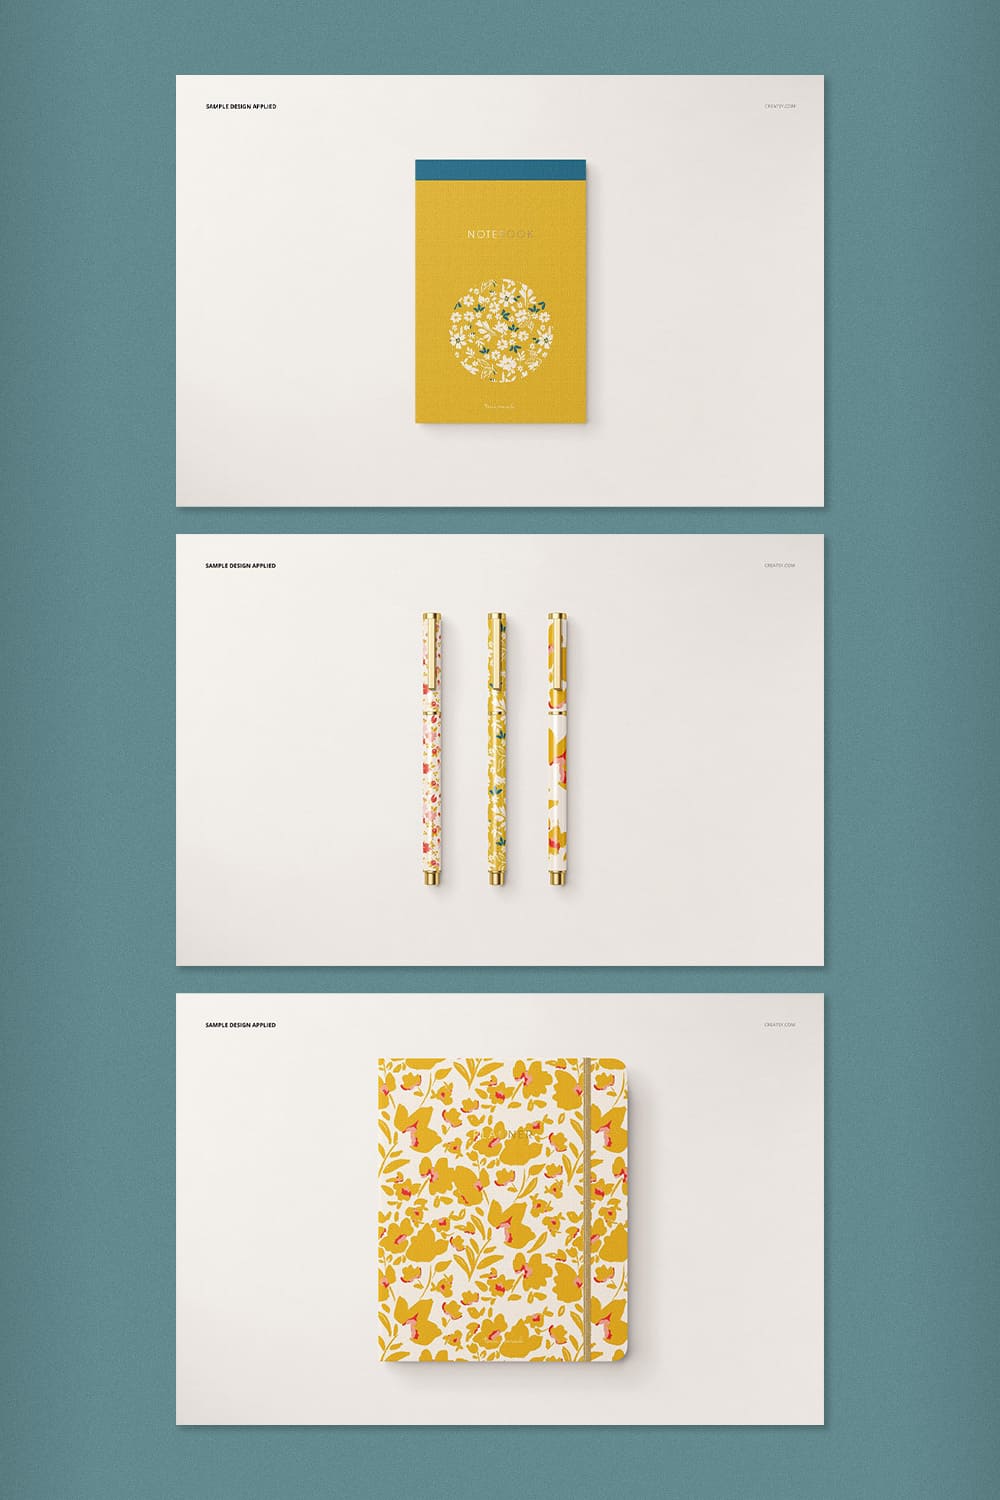 A pack of images of stationery with an enchanting design.